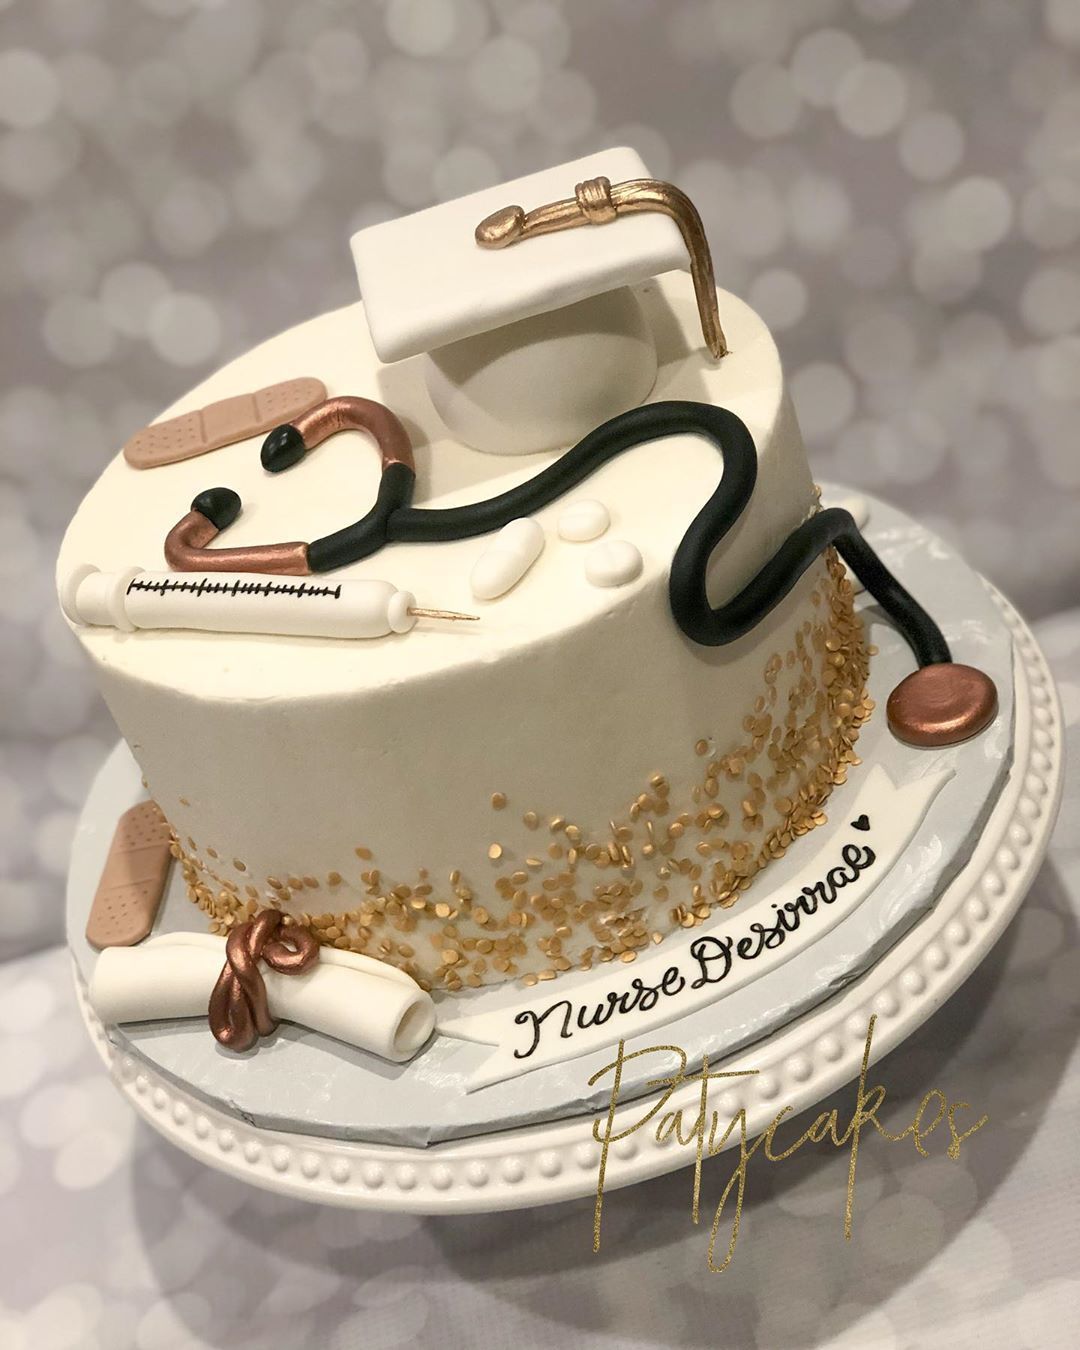 22 Stethoscope Cake Designs for Frontline Healthcare Workers.jpeg